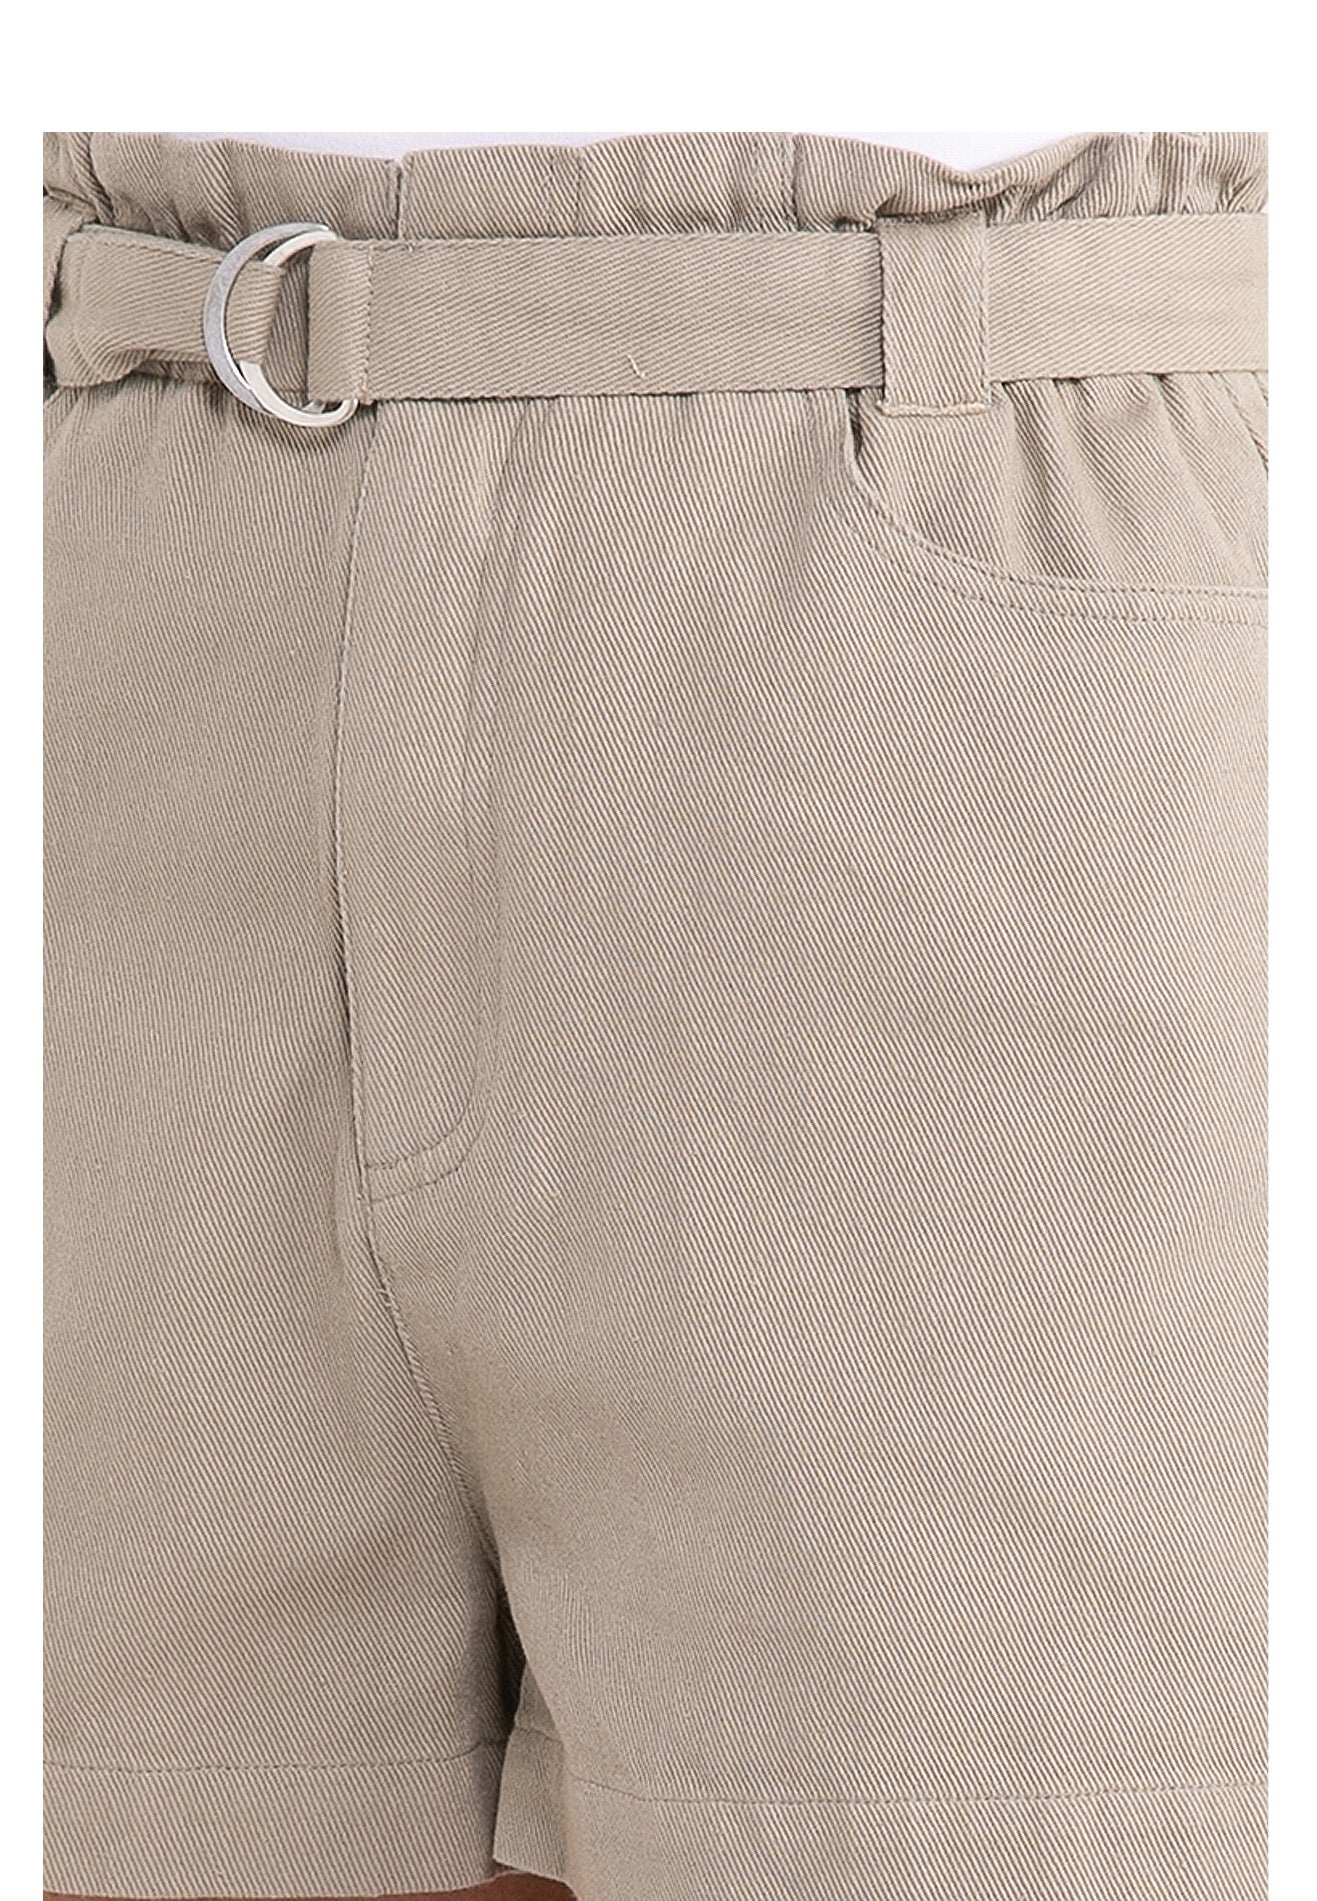 ELLE Apparel Belted Cotton Twill Tailored Shorts